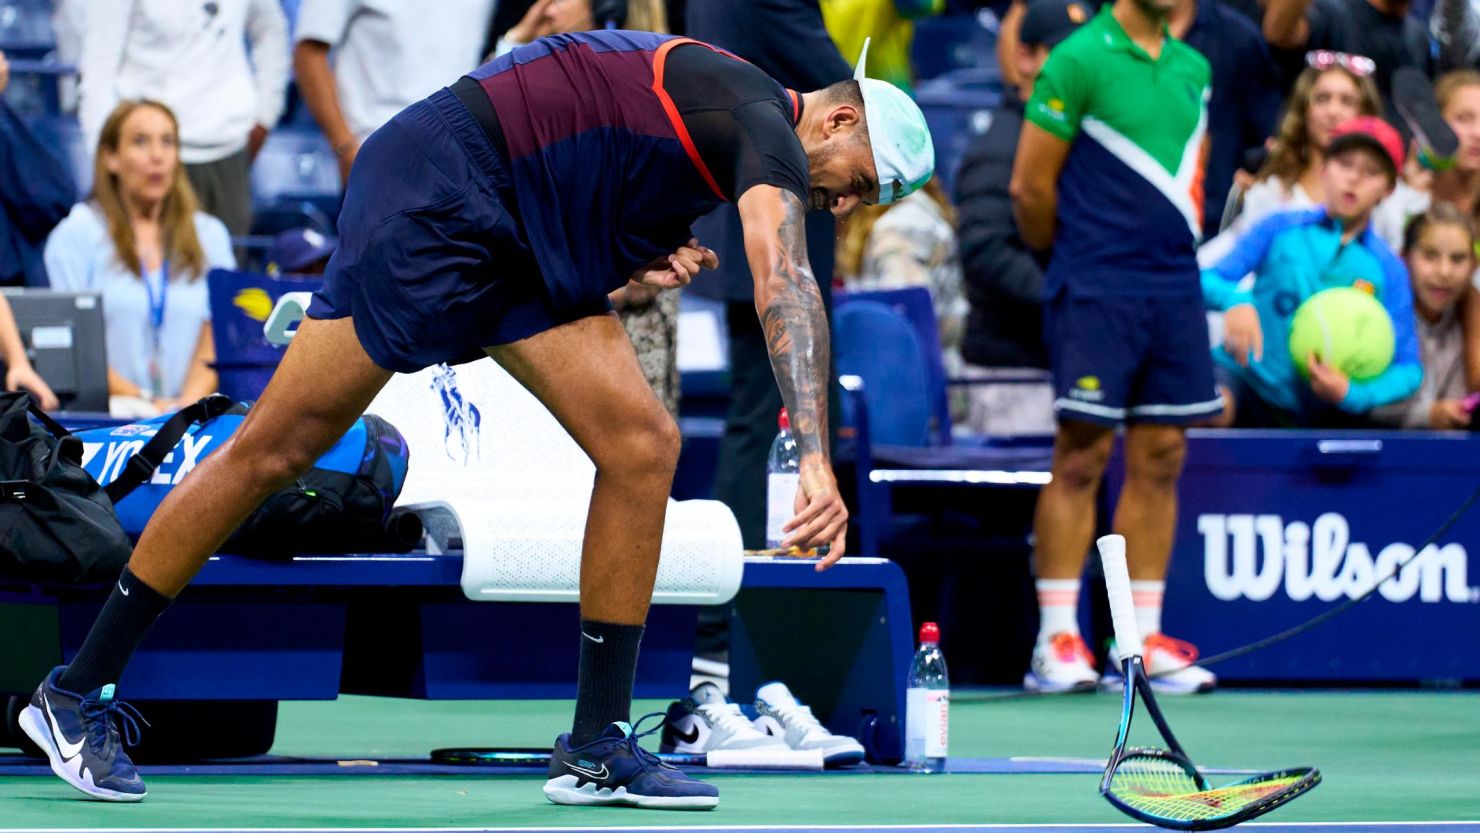 Nick Kyrgios smashes his racket after being defeated by Karen Khachanov in the US Open quarterfinals.